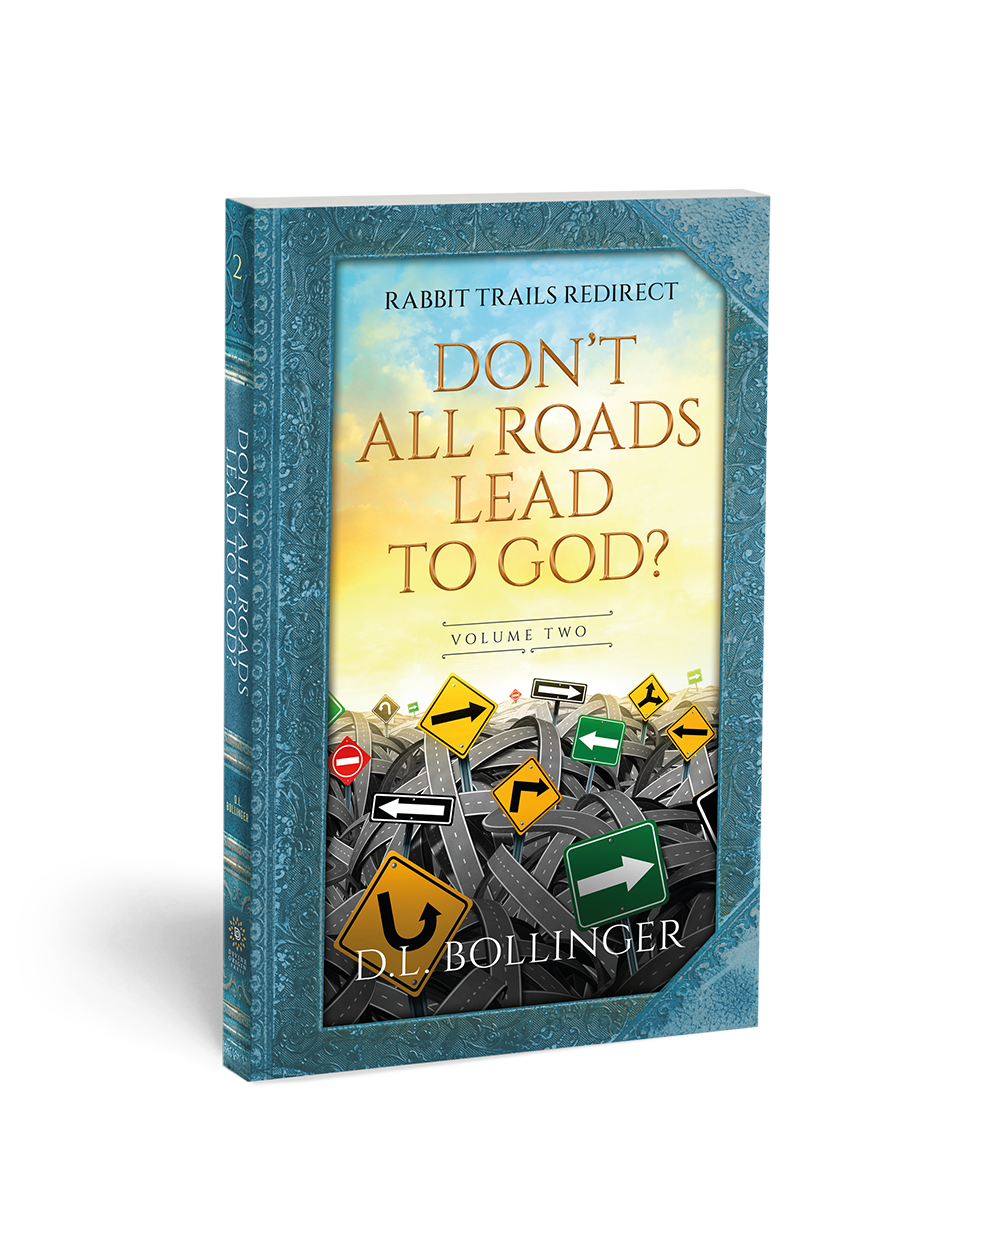 Rabbit Trails Redirect (Volume Two): Don't All Roads Lead to God? — Paperback